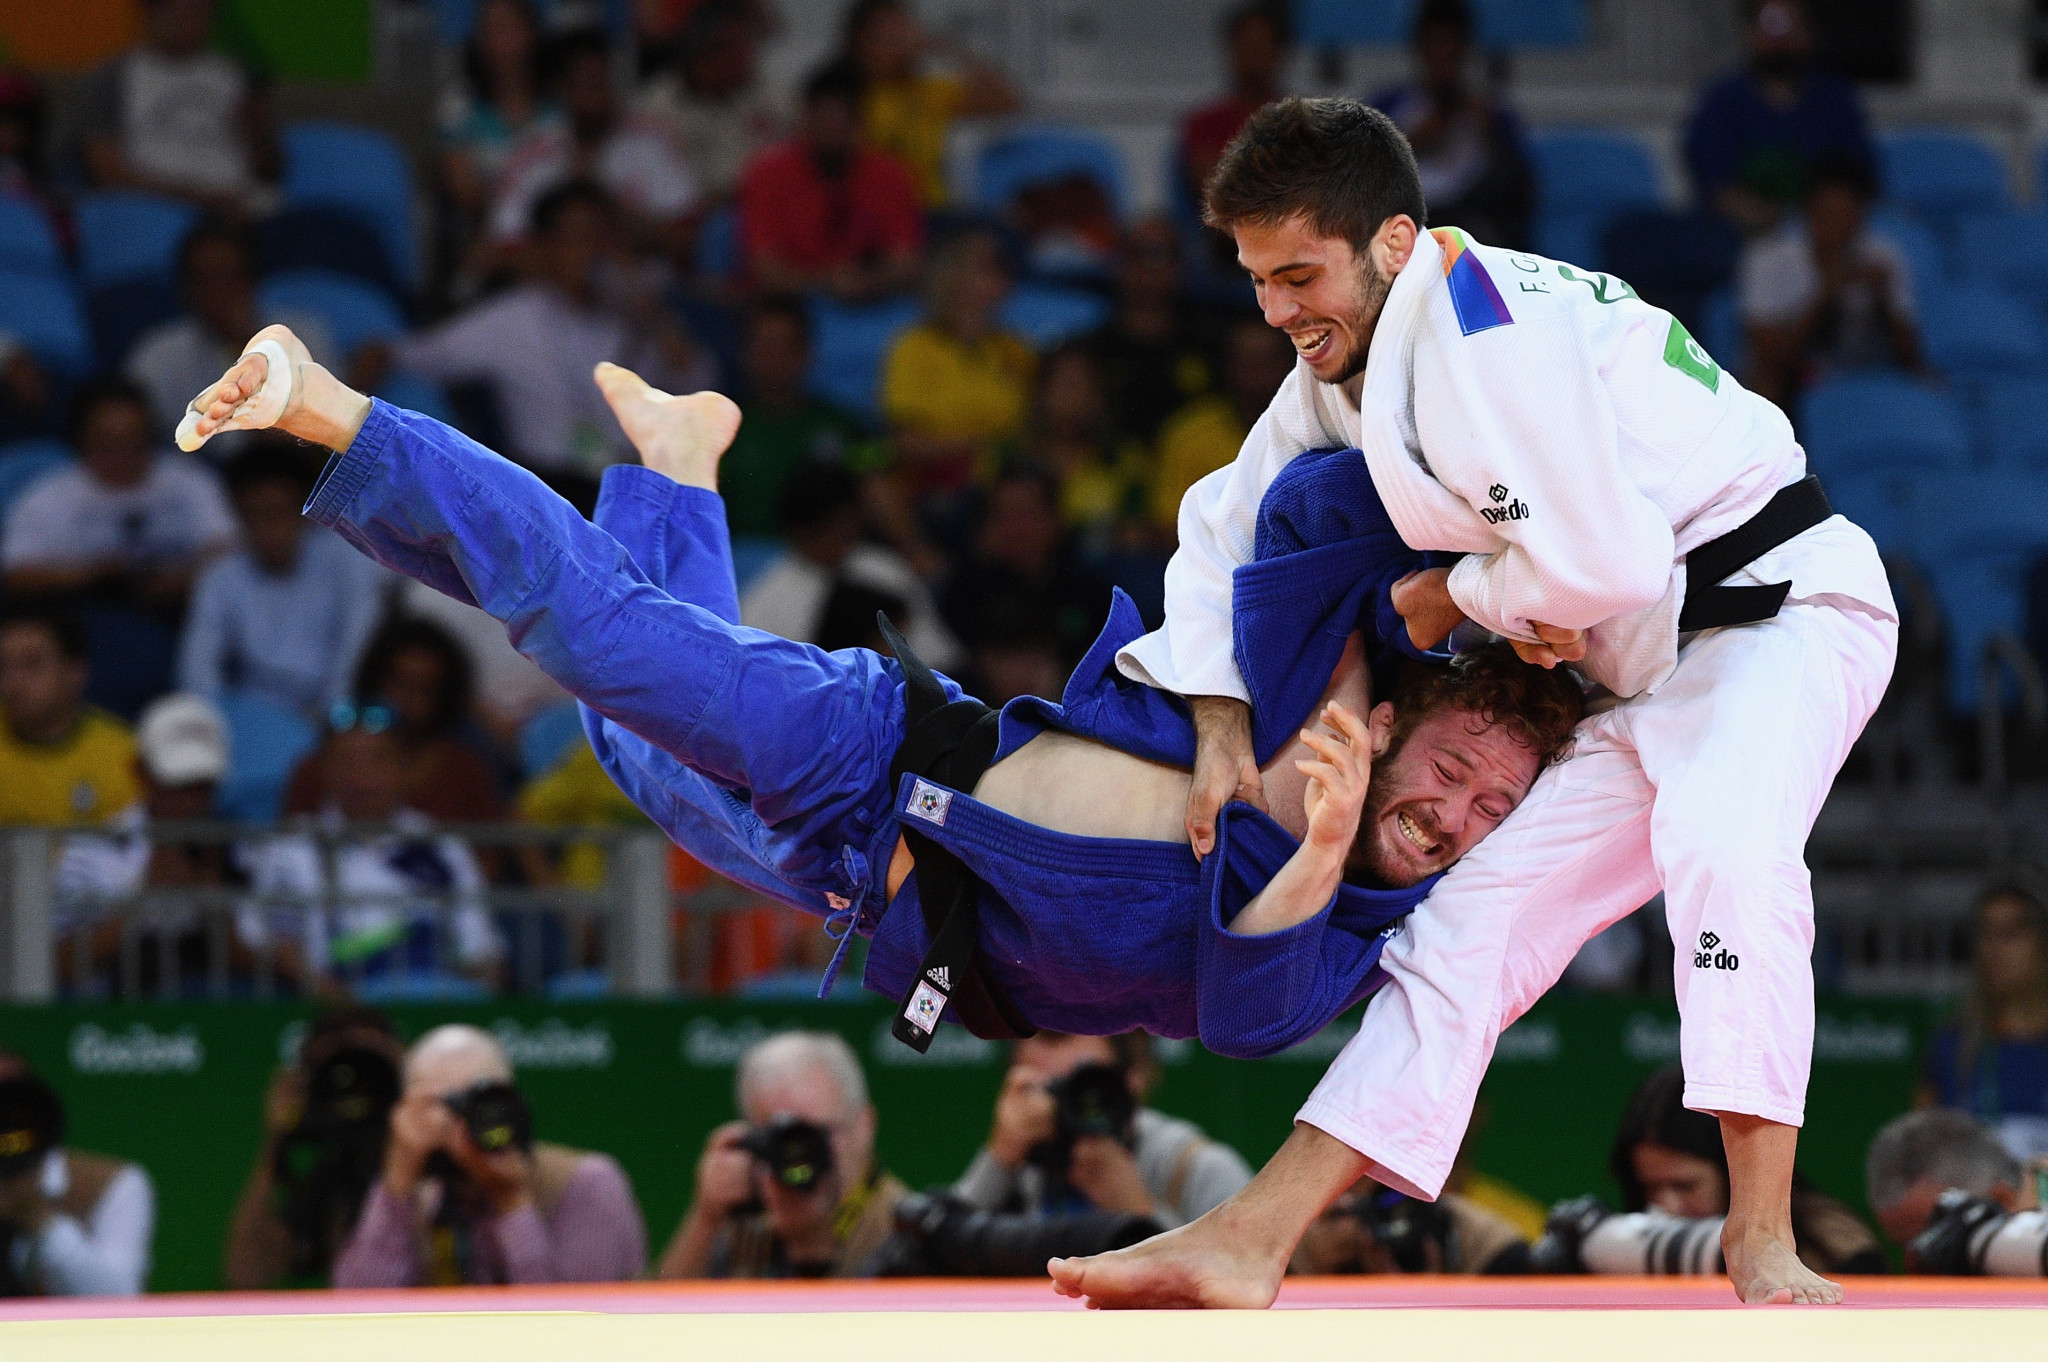 Judo has been on the programme for 13 Summer Olympic Games ©Getty Images